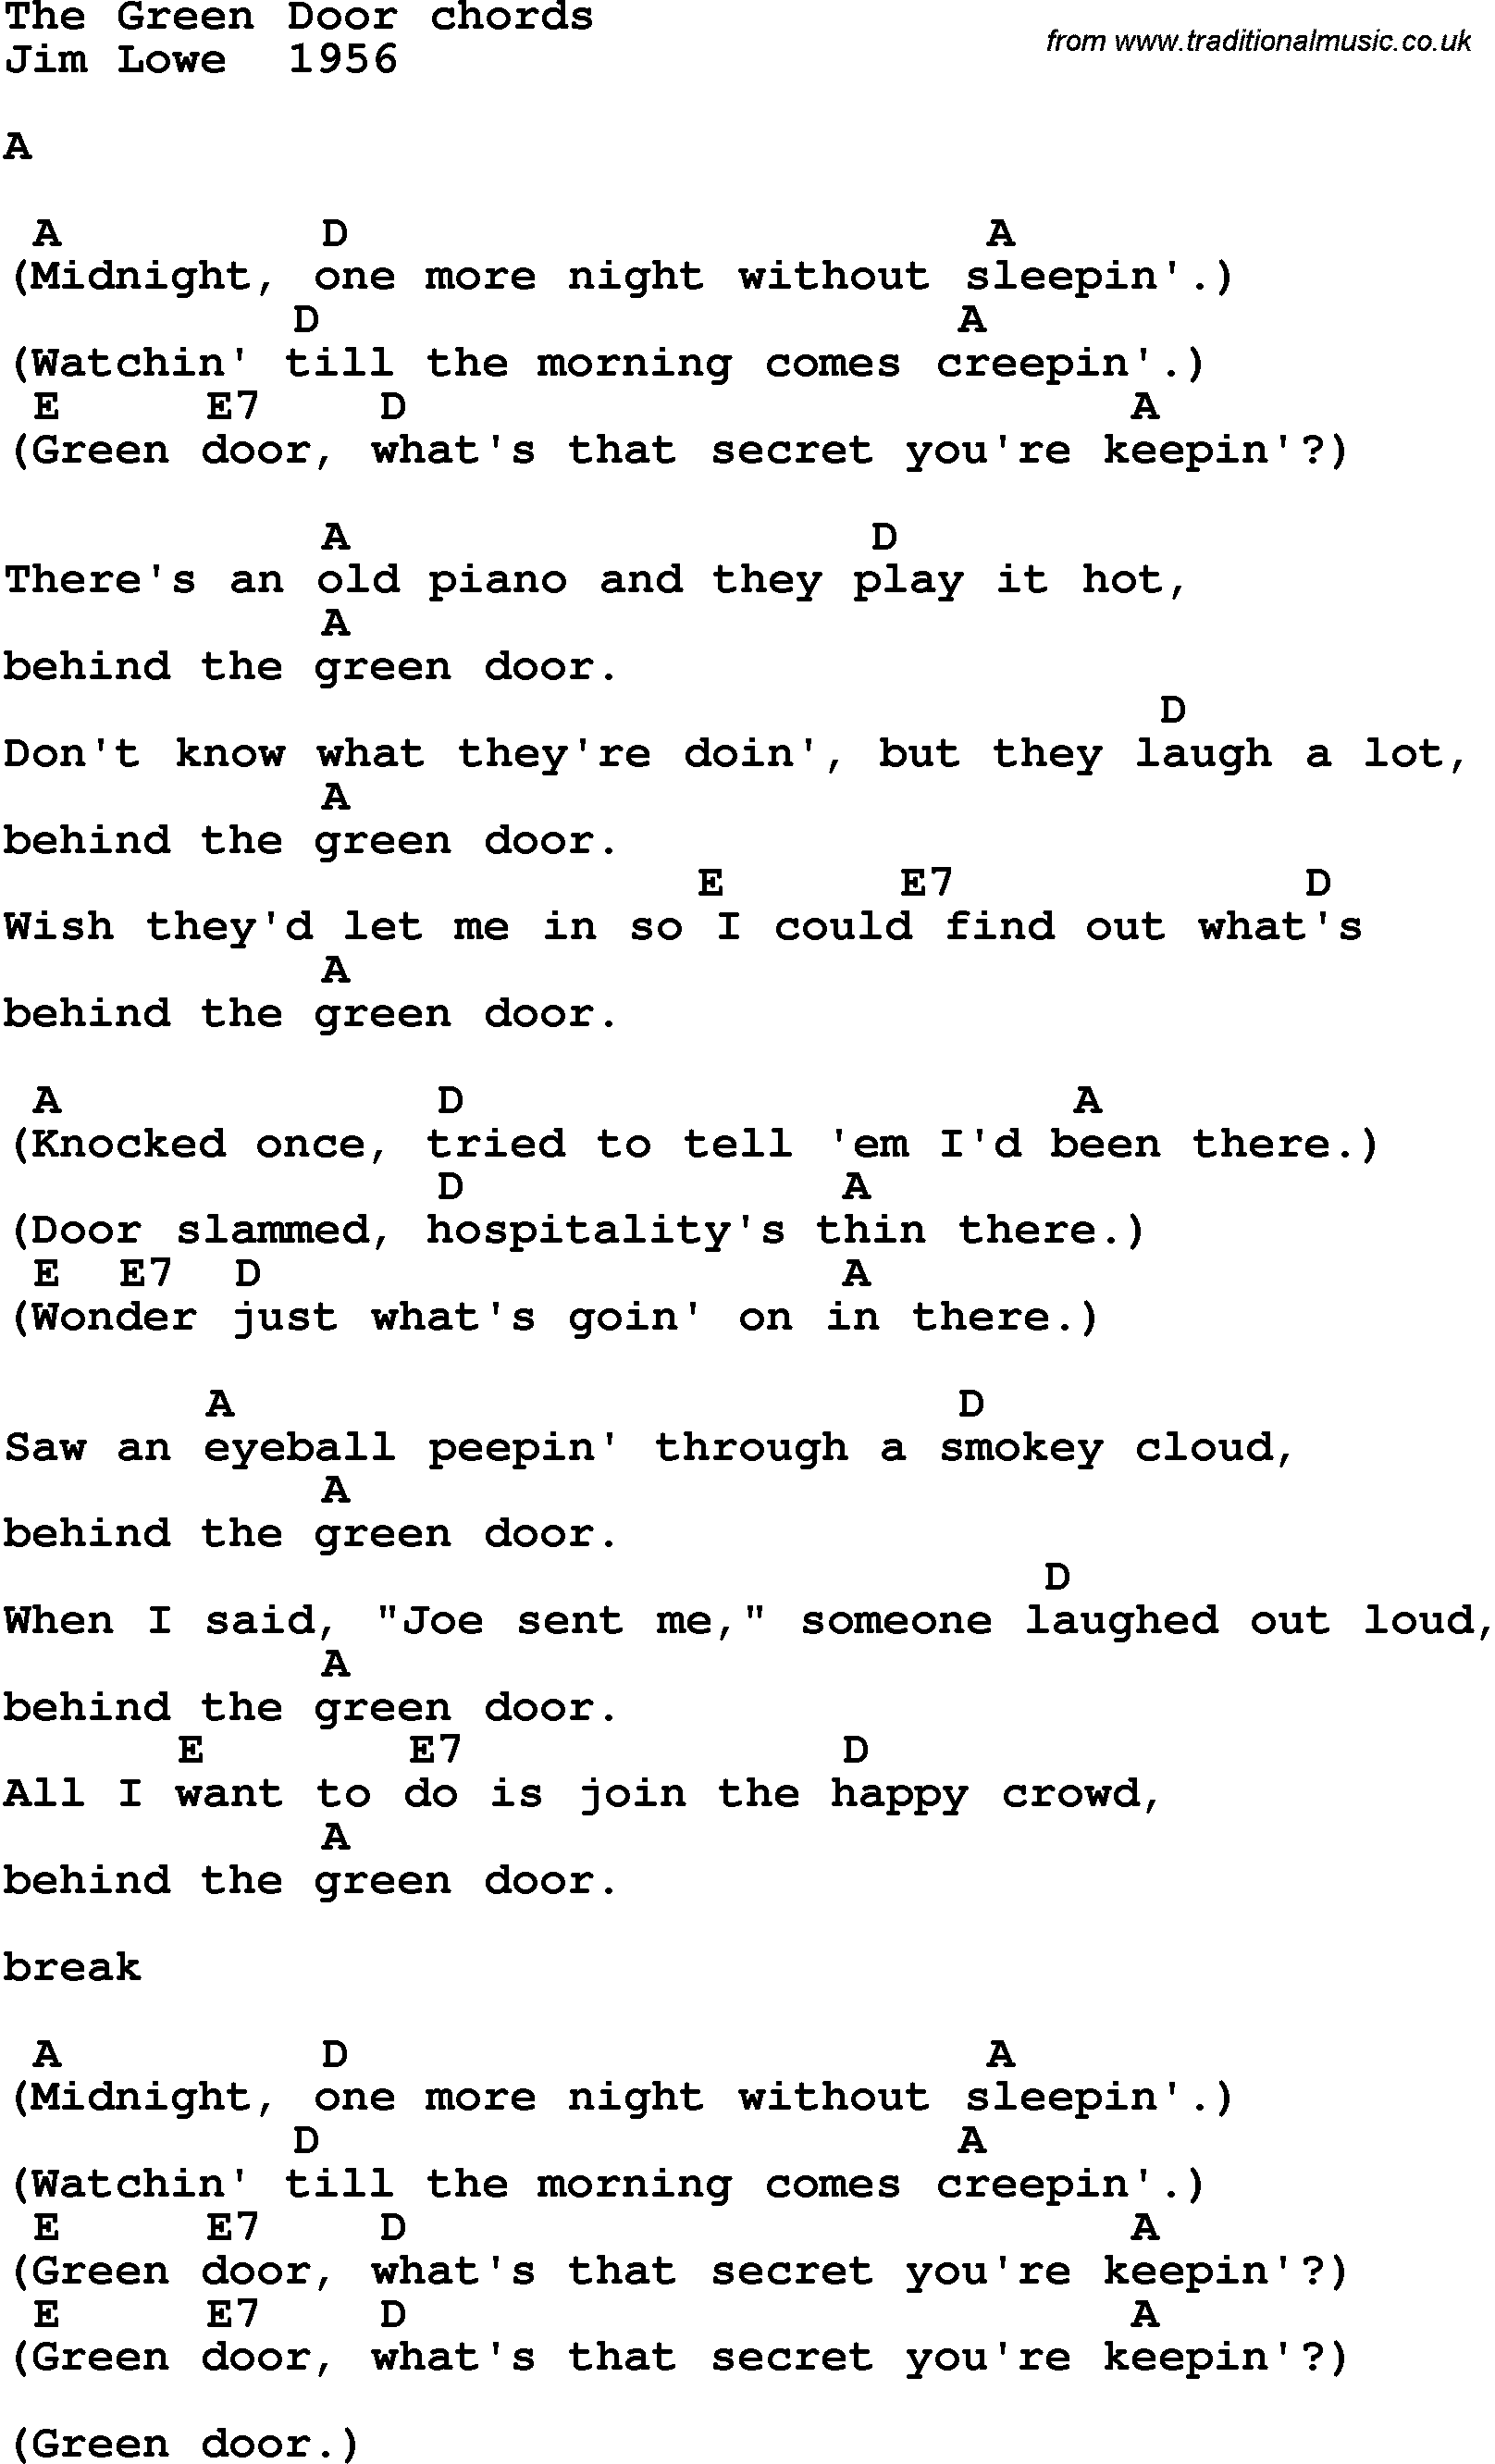 Song Lyrics with guitar chords for The Green Door - Jim Lowe 1956